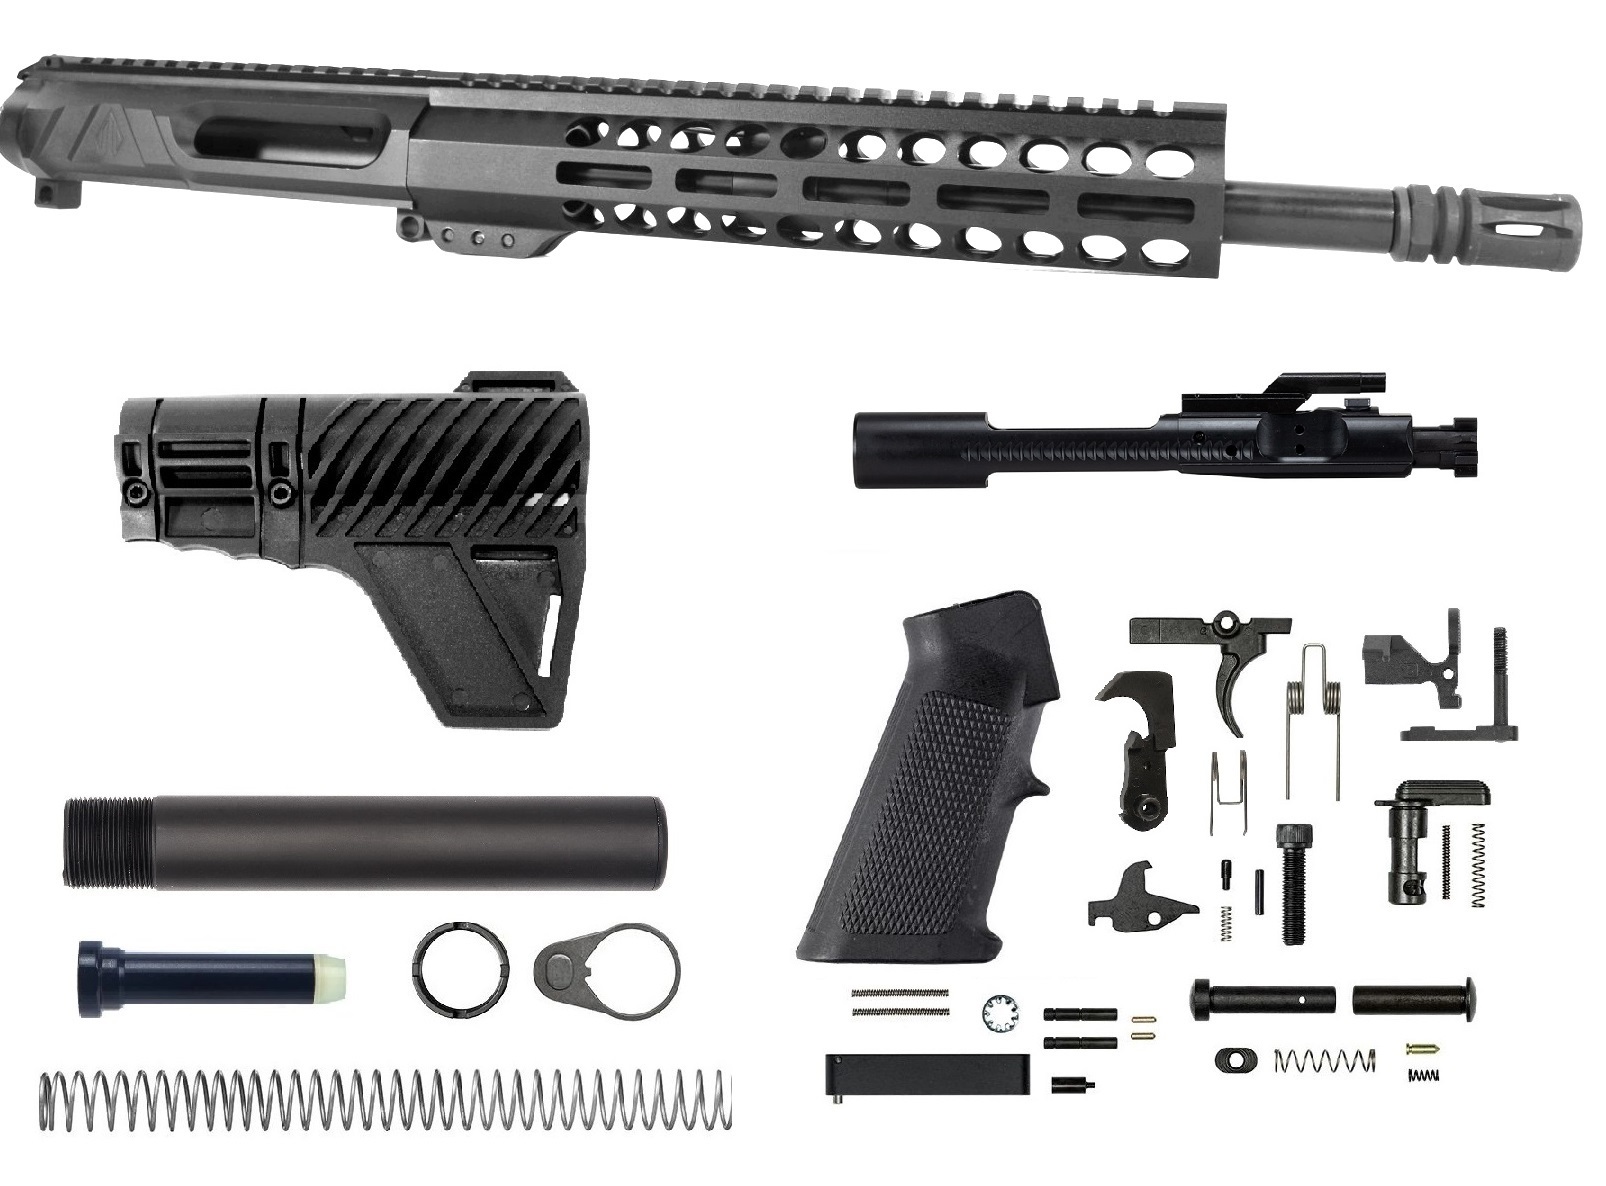 12.5 inch 300 Blackout AR-15 Side Charging Upper Kit | Pro2A Tactical